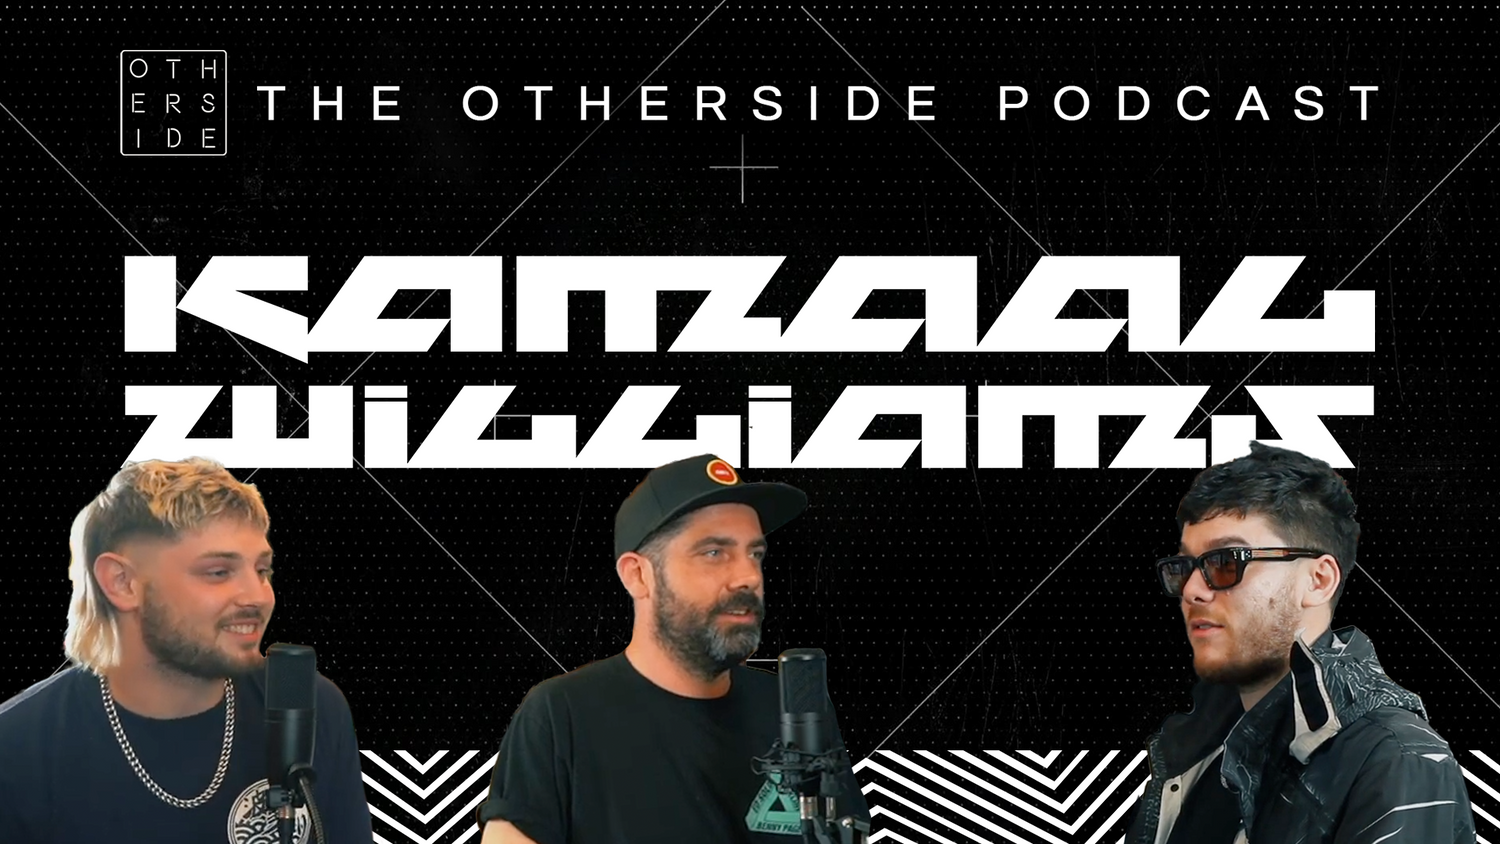 Kamaal Williams - The Otherside Podcast